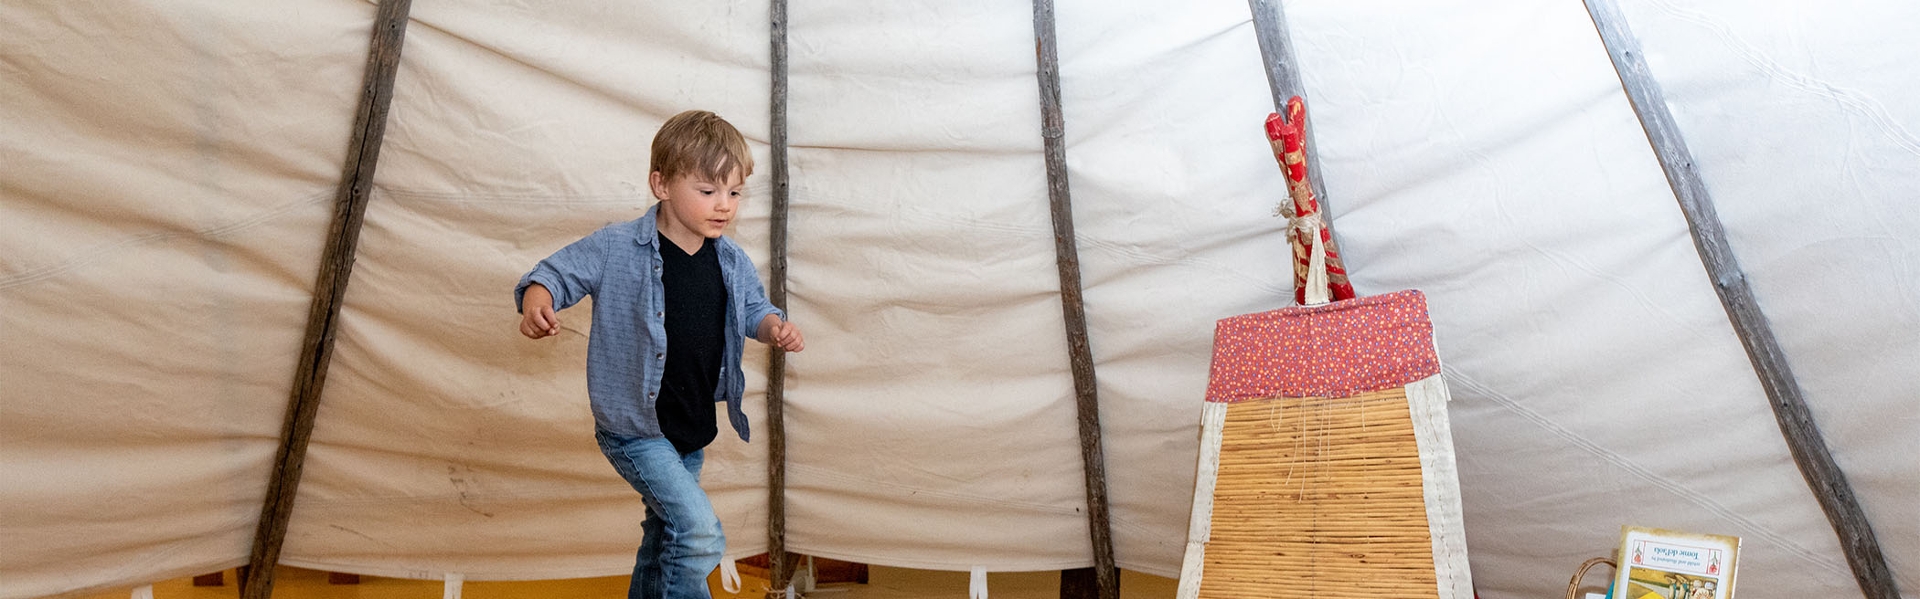 Child in a tipi